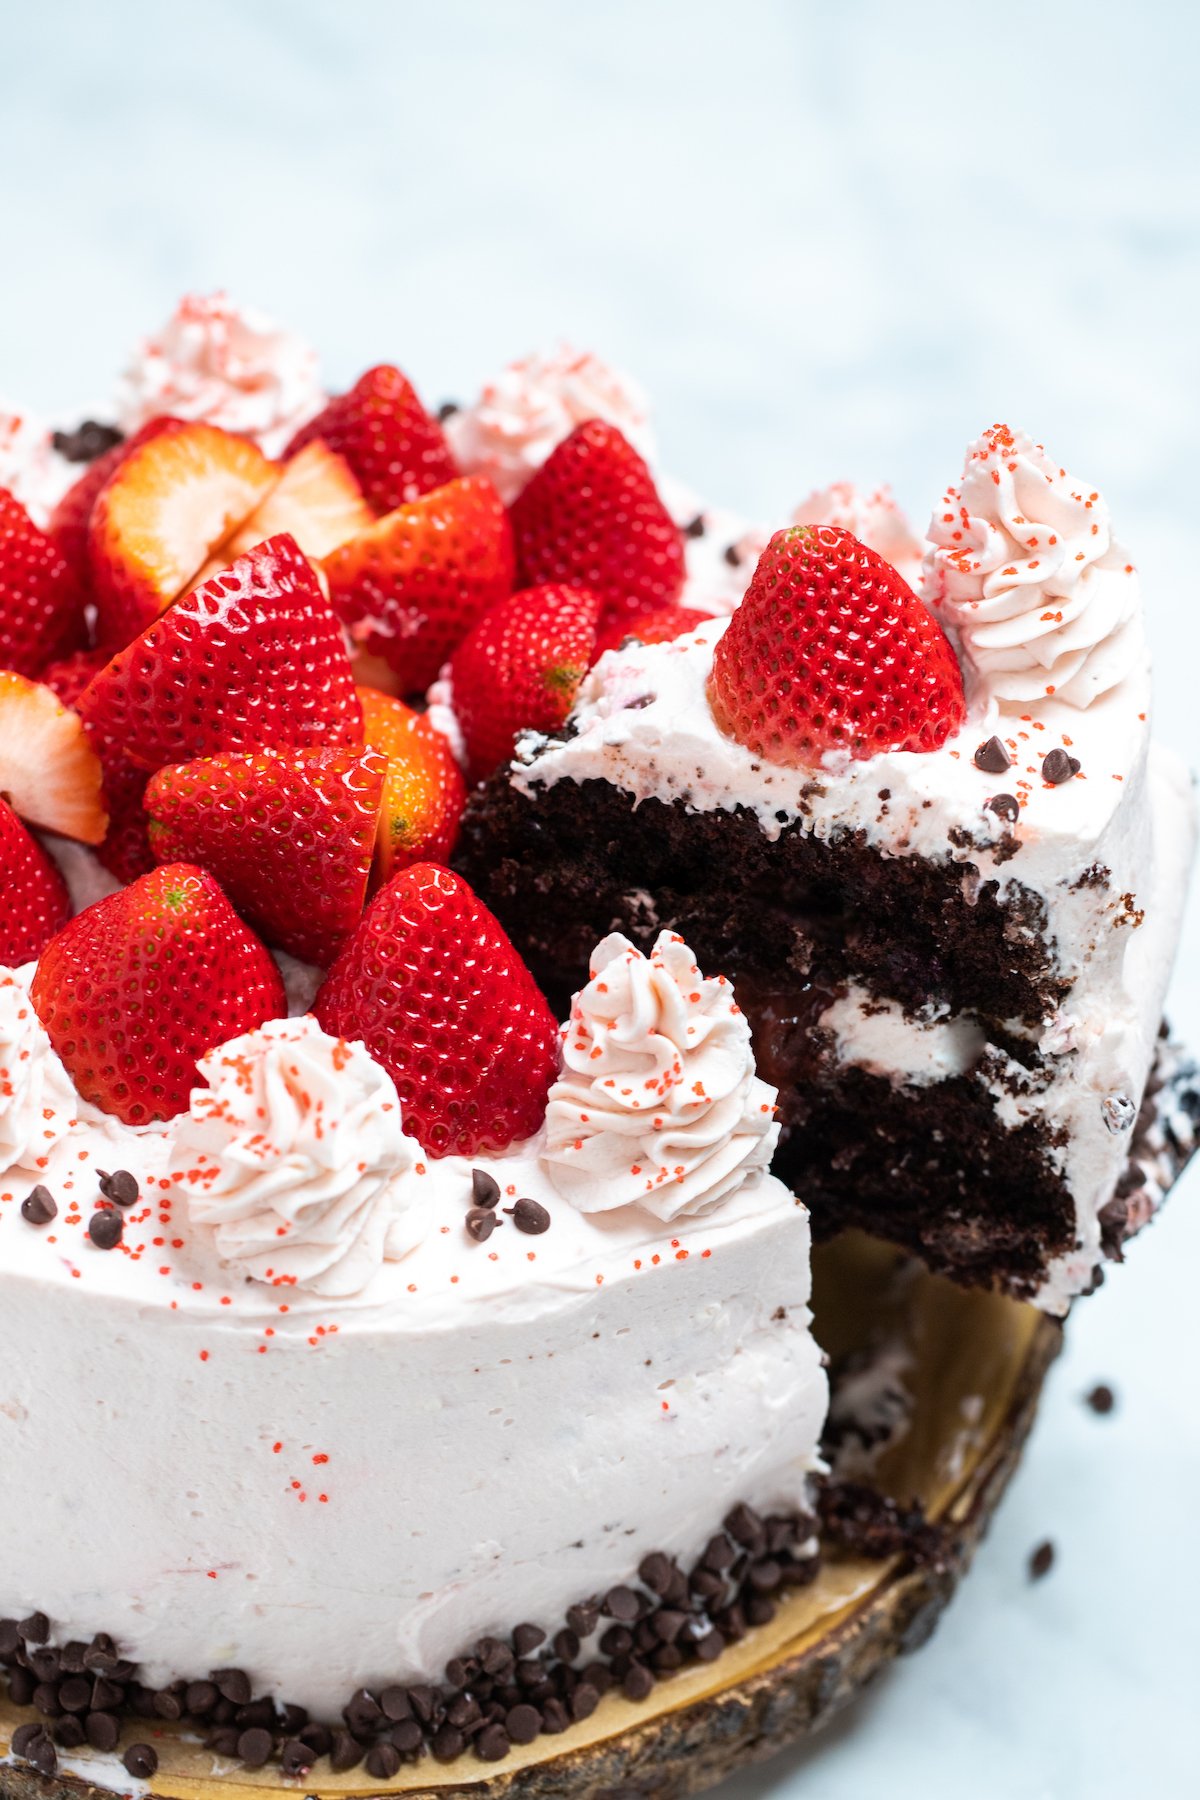 A strawberry chocolate cake on a wooden cake stand, decorated with mini chocolate chips and frosting dolloped on top with fresh whole strawberries, with a piece of cake being lifted up with strawberry filling on the inside.